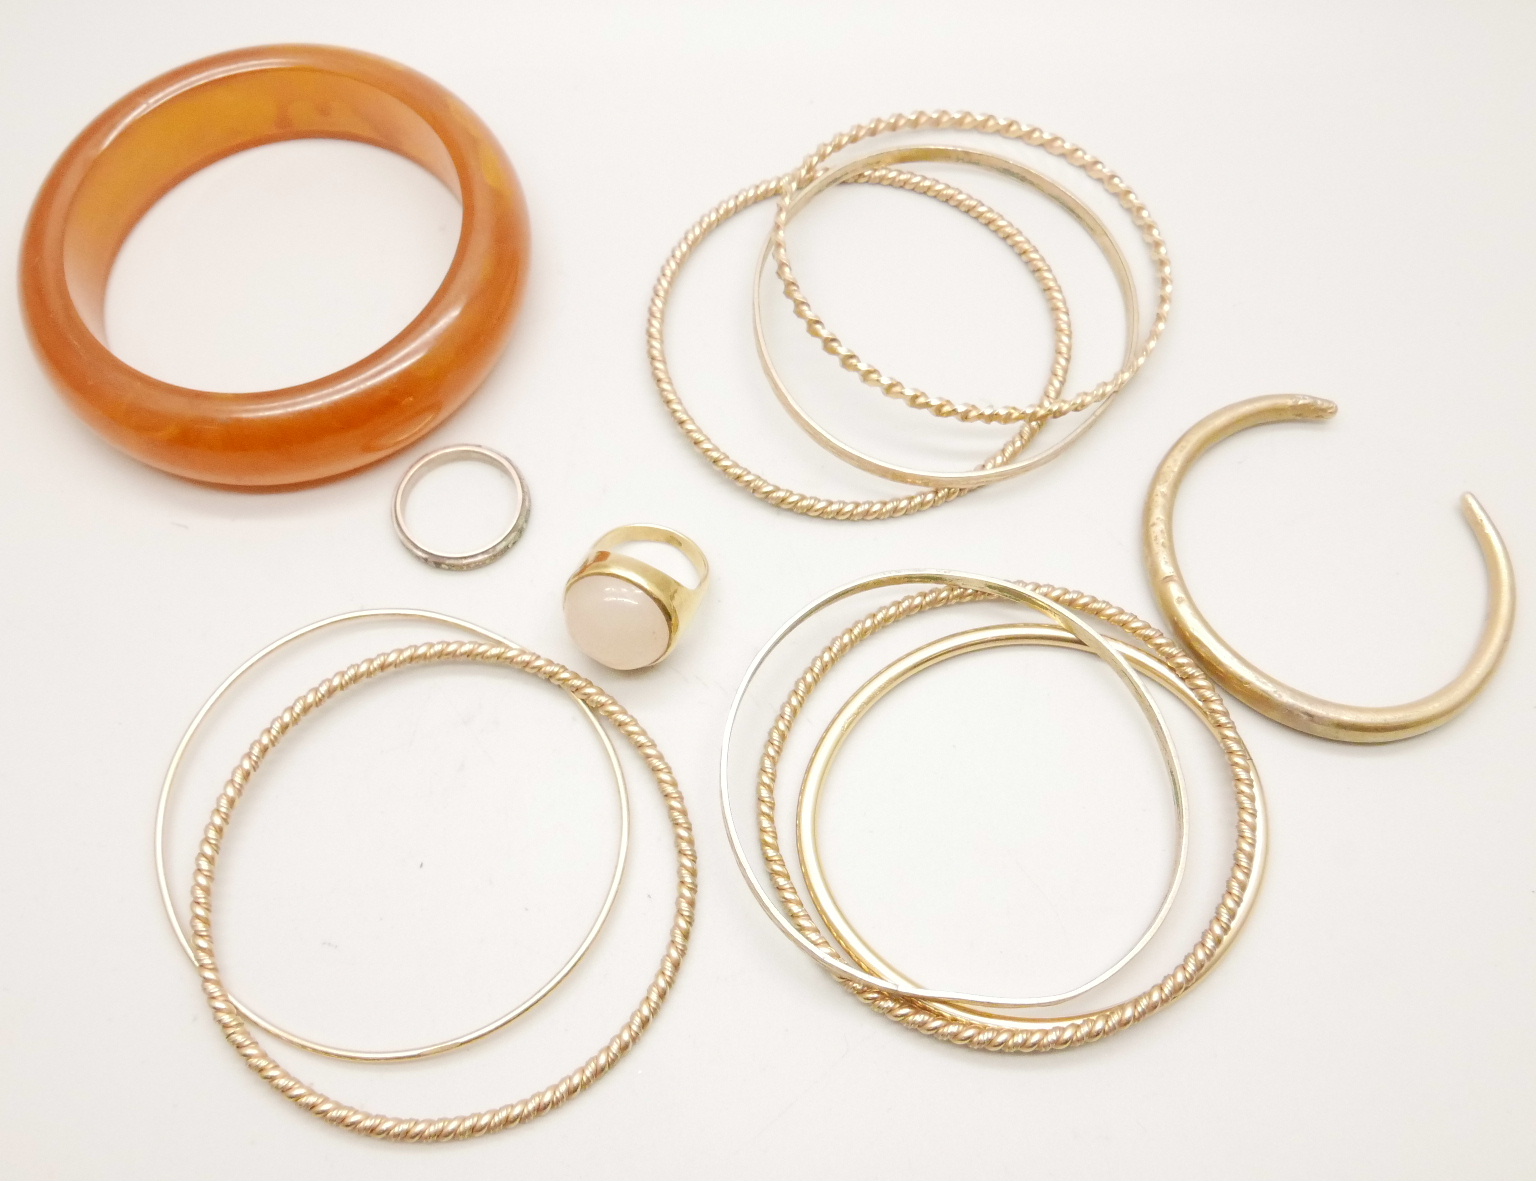 A collection of gold tone bangles and a ring, and one other bangle